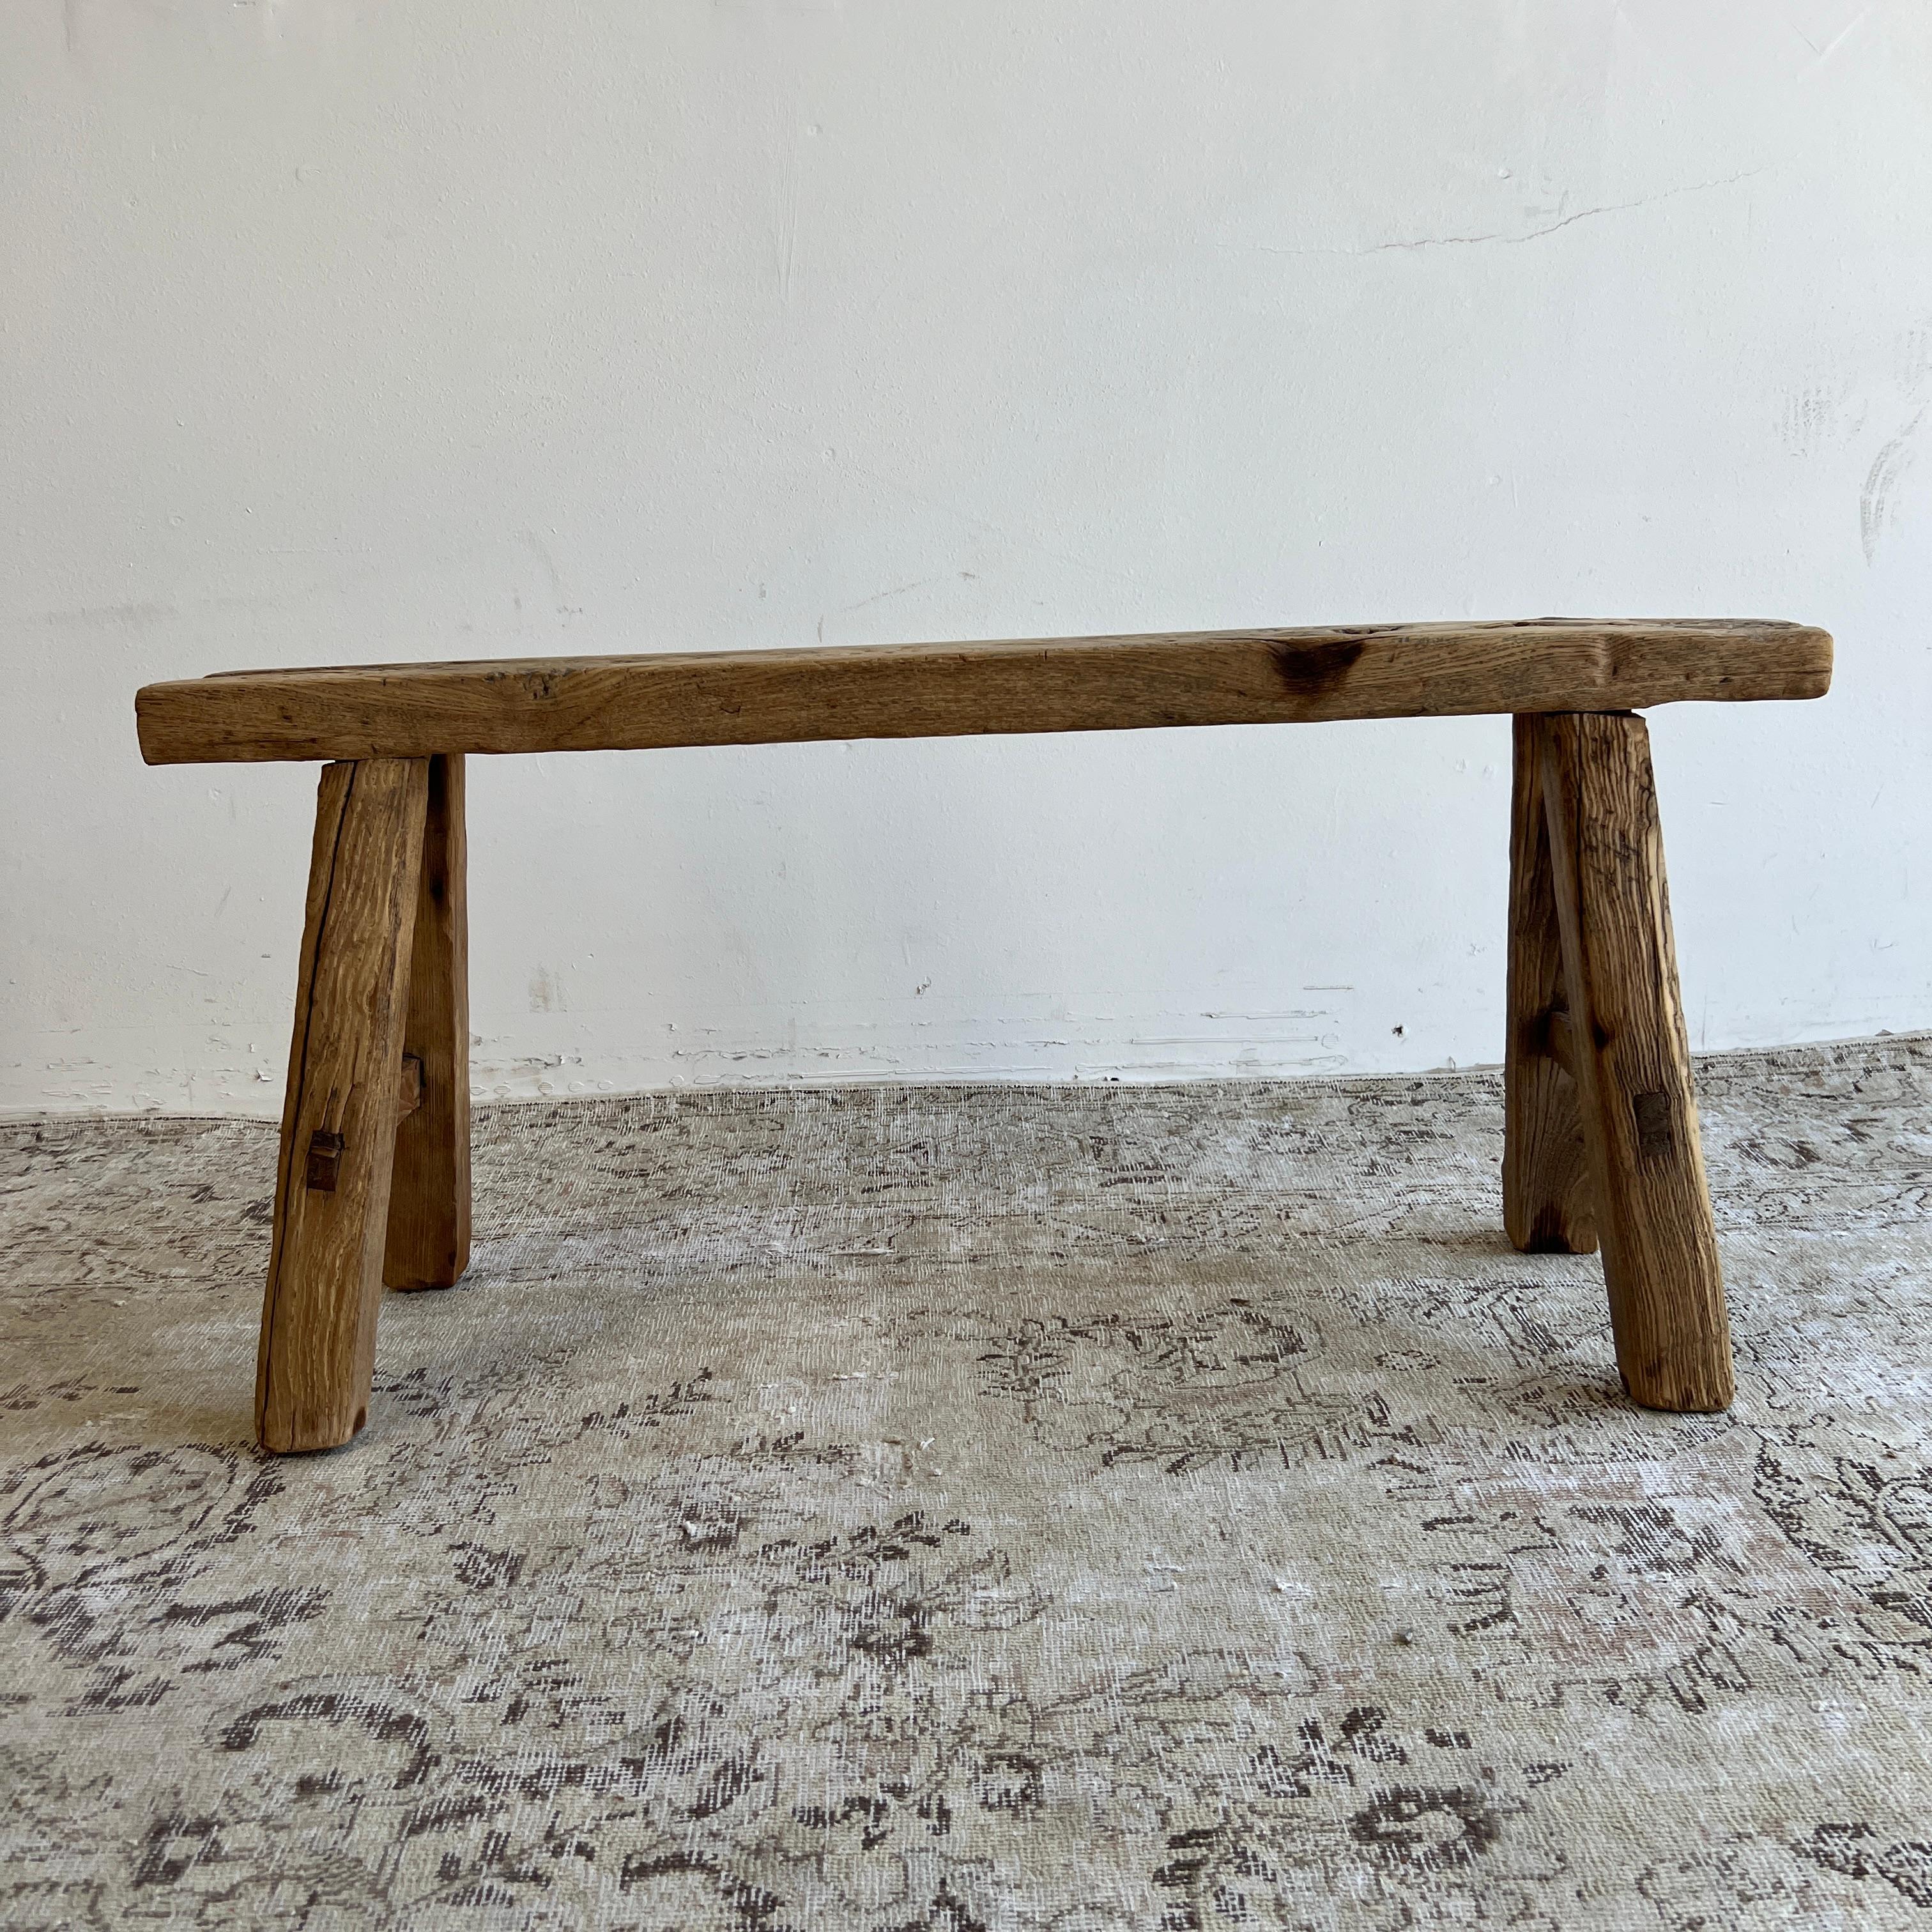 Vintage Antique elm wood bench.
These are the real vintage antique elm wood benches! Beautiful antique patina, with weathering and age, these are solid and sturdy ready for daily use, use as as a table behind a sofa, stool, coffee table, they are